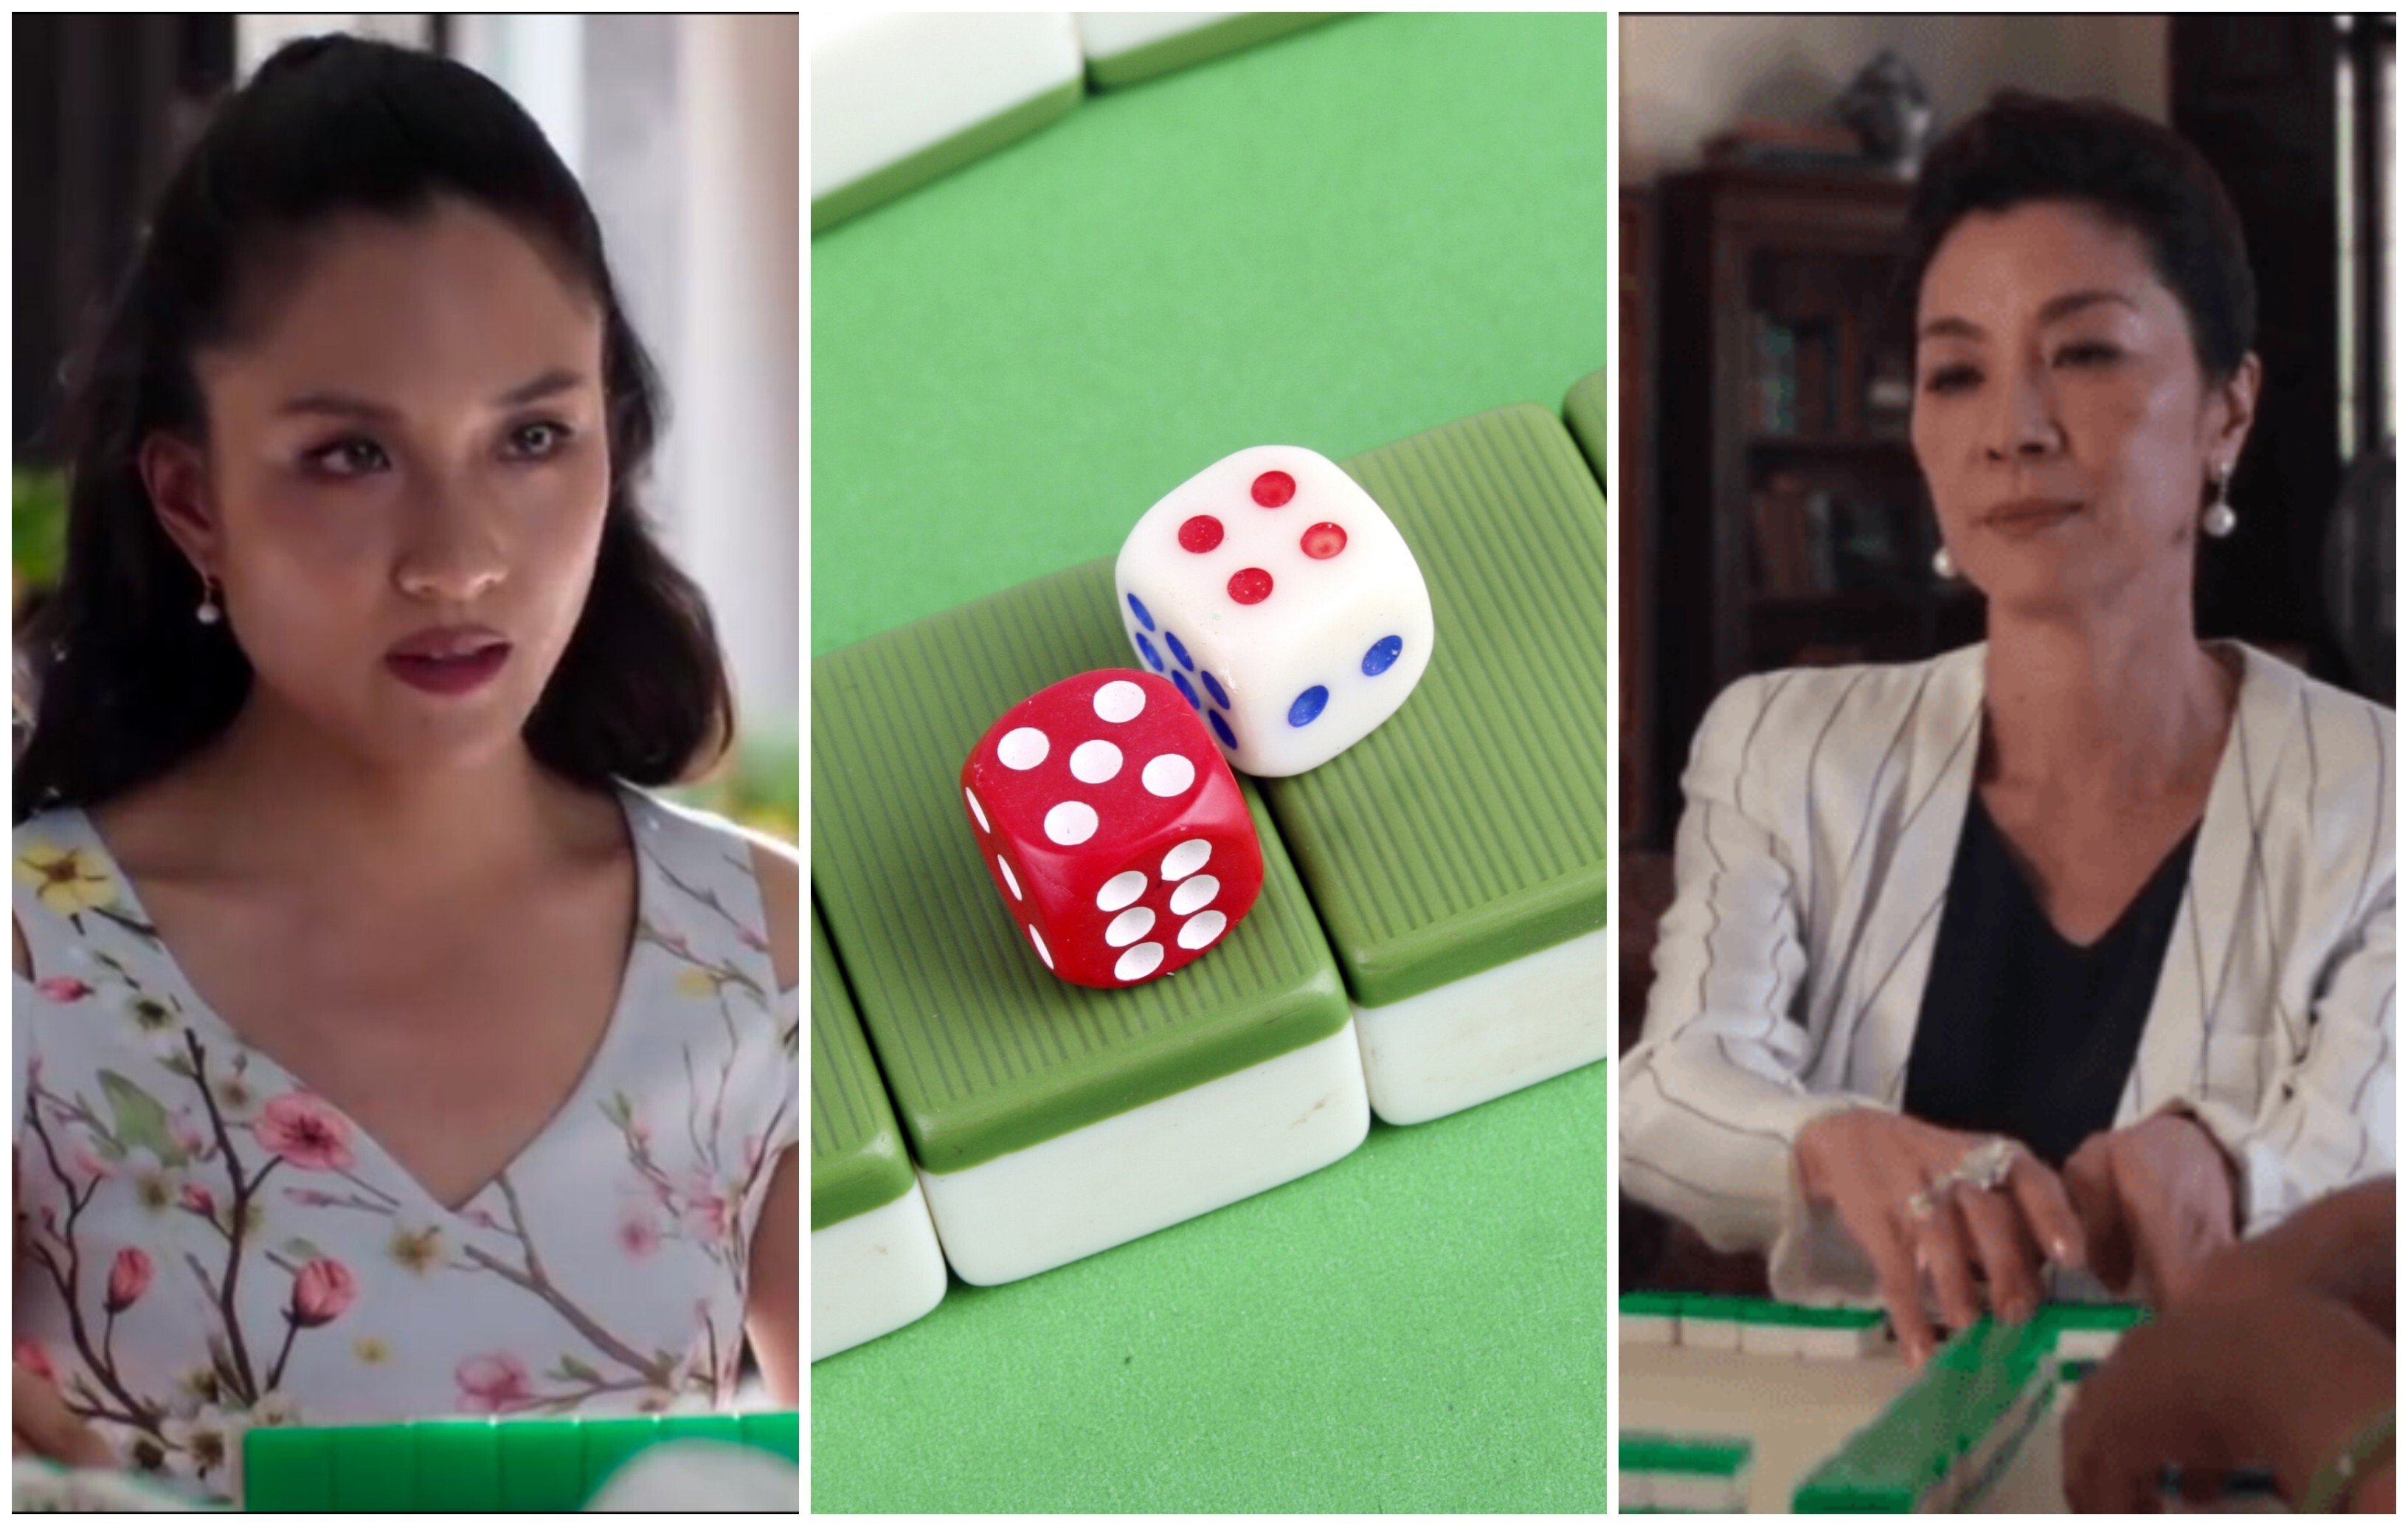 Mahjong was featured prominently in Hollywood film Crazy Rich Asians. Photos: Crazy Rich Asians, Shutterstock